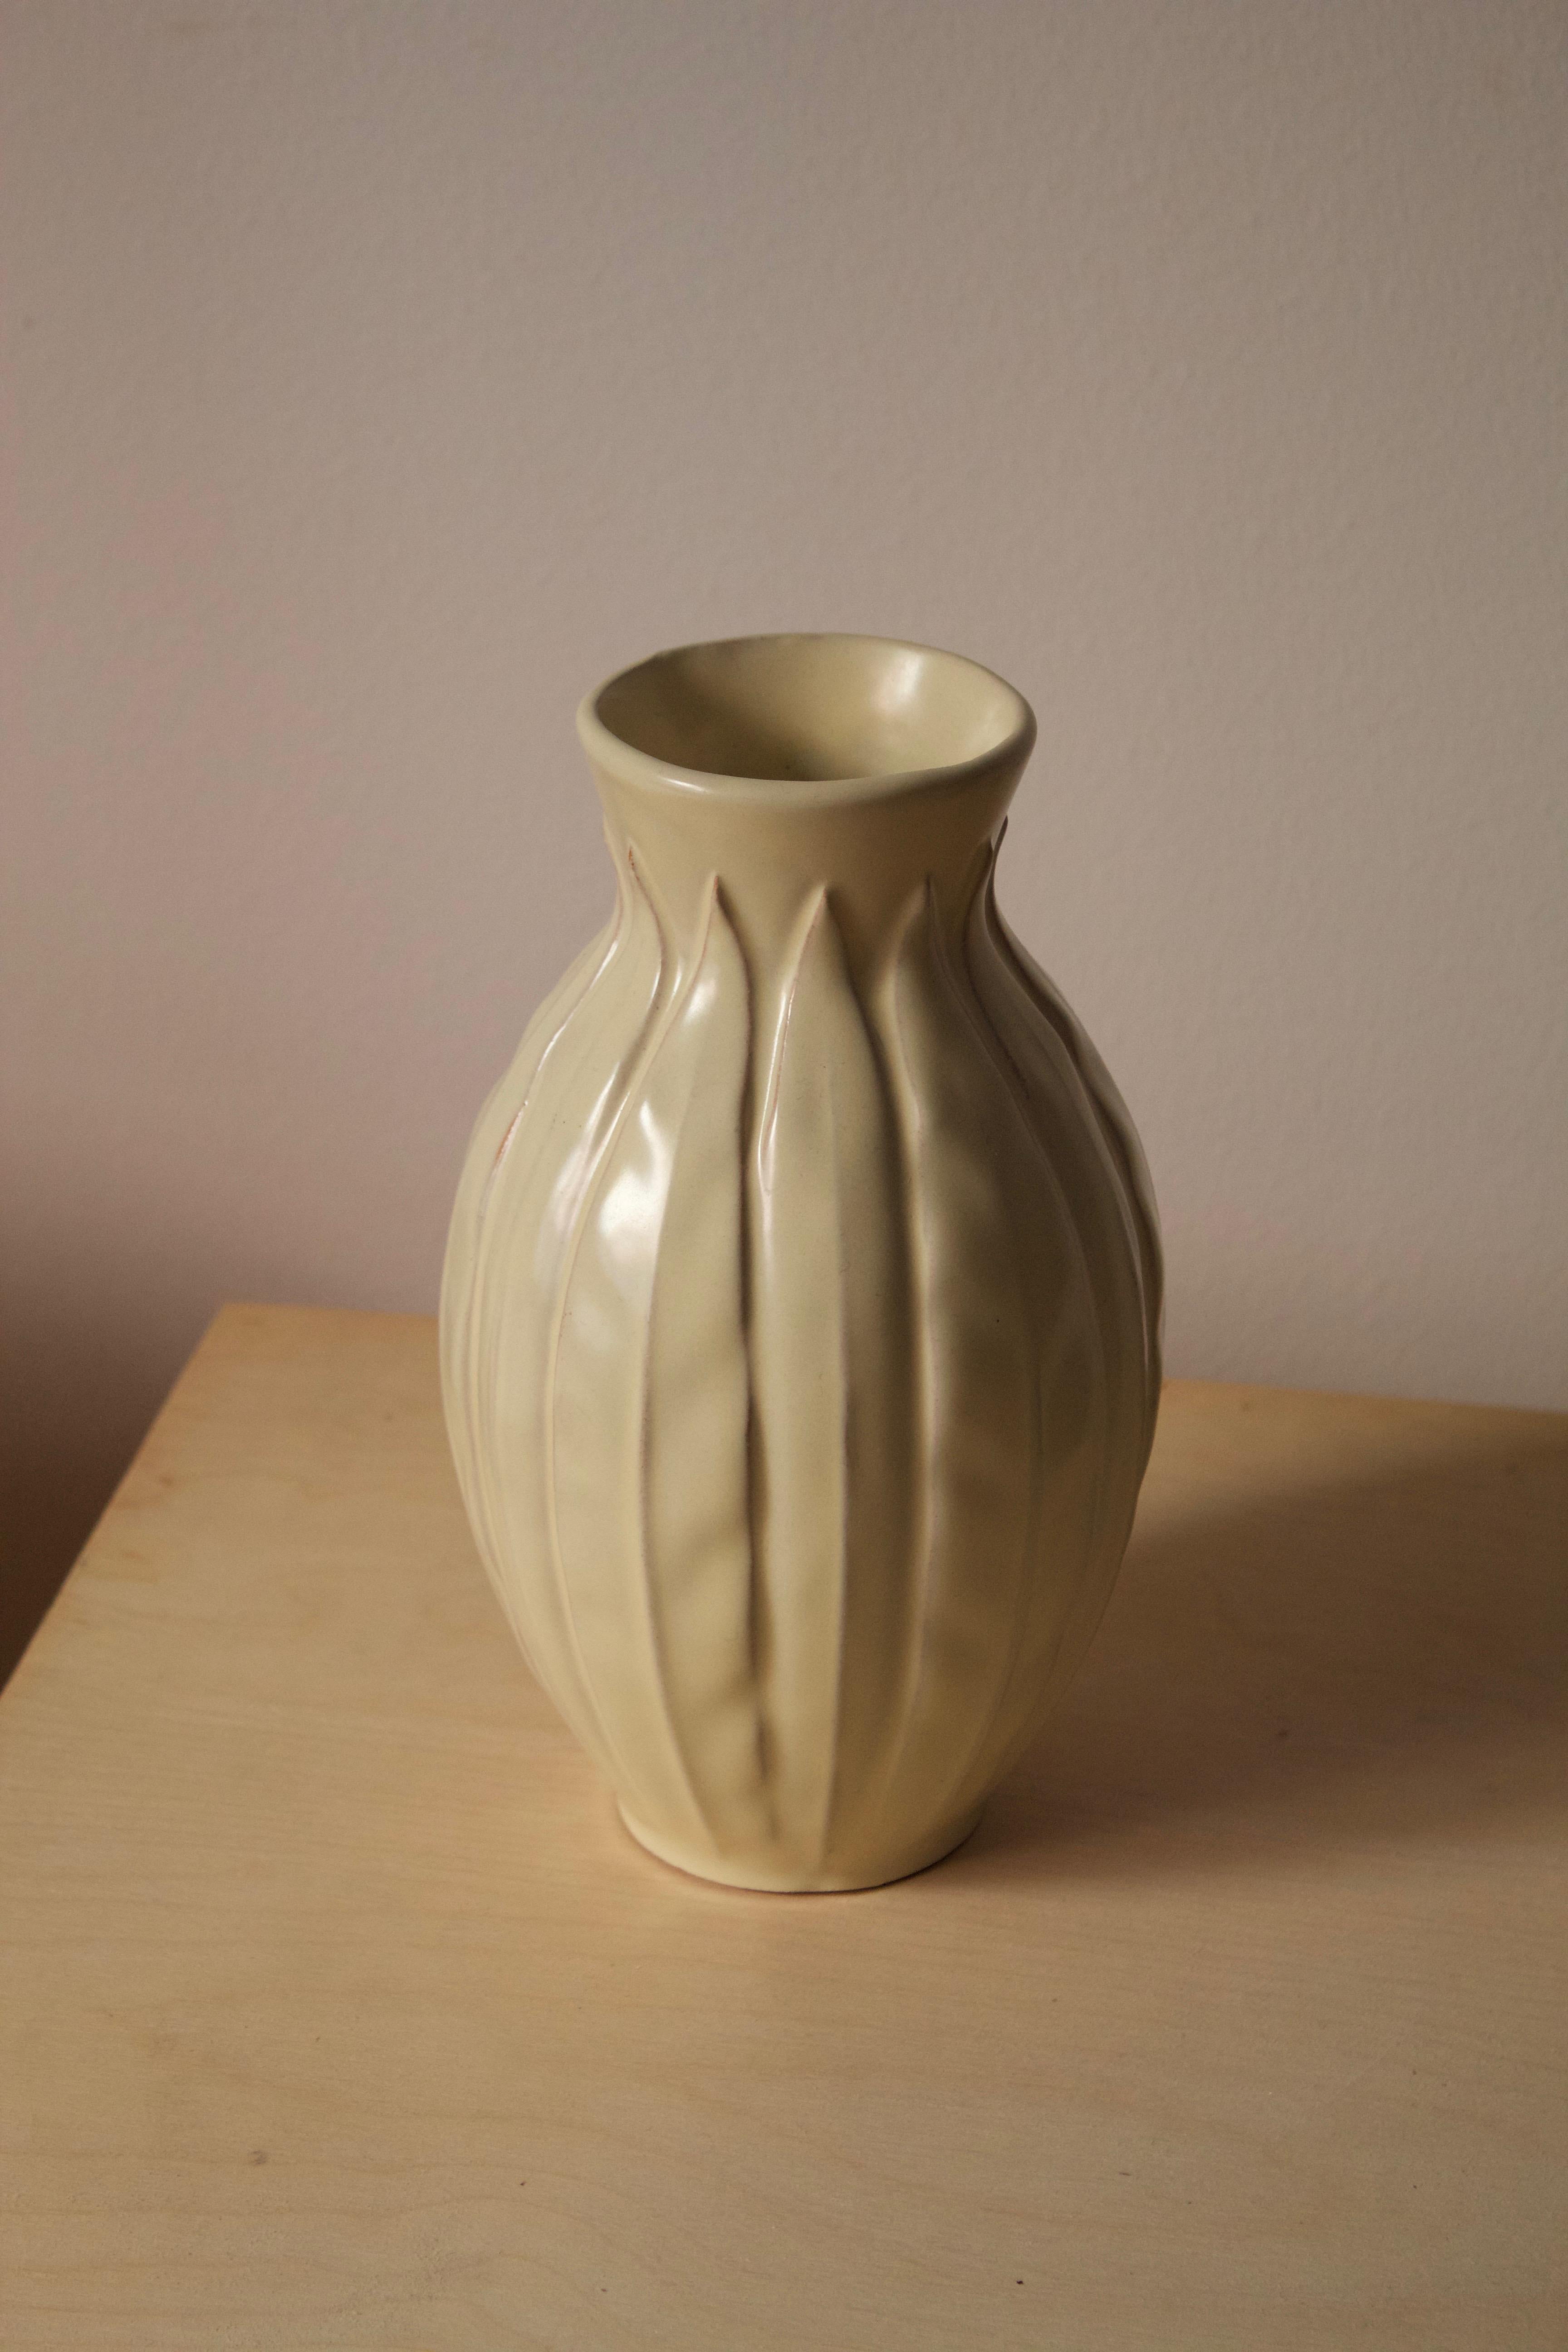 An early modernist vase. Designed by Anna-Lisa Thomson, for Upsala-Ekeby, Sweden, 1940s. 

Other designers of the period include Ettore Sottsass, Carl Harry Stålhane, Lisa Larsson, Axel Salto, and Arne Bang.